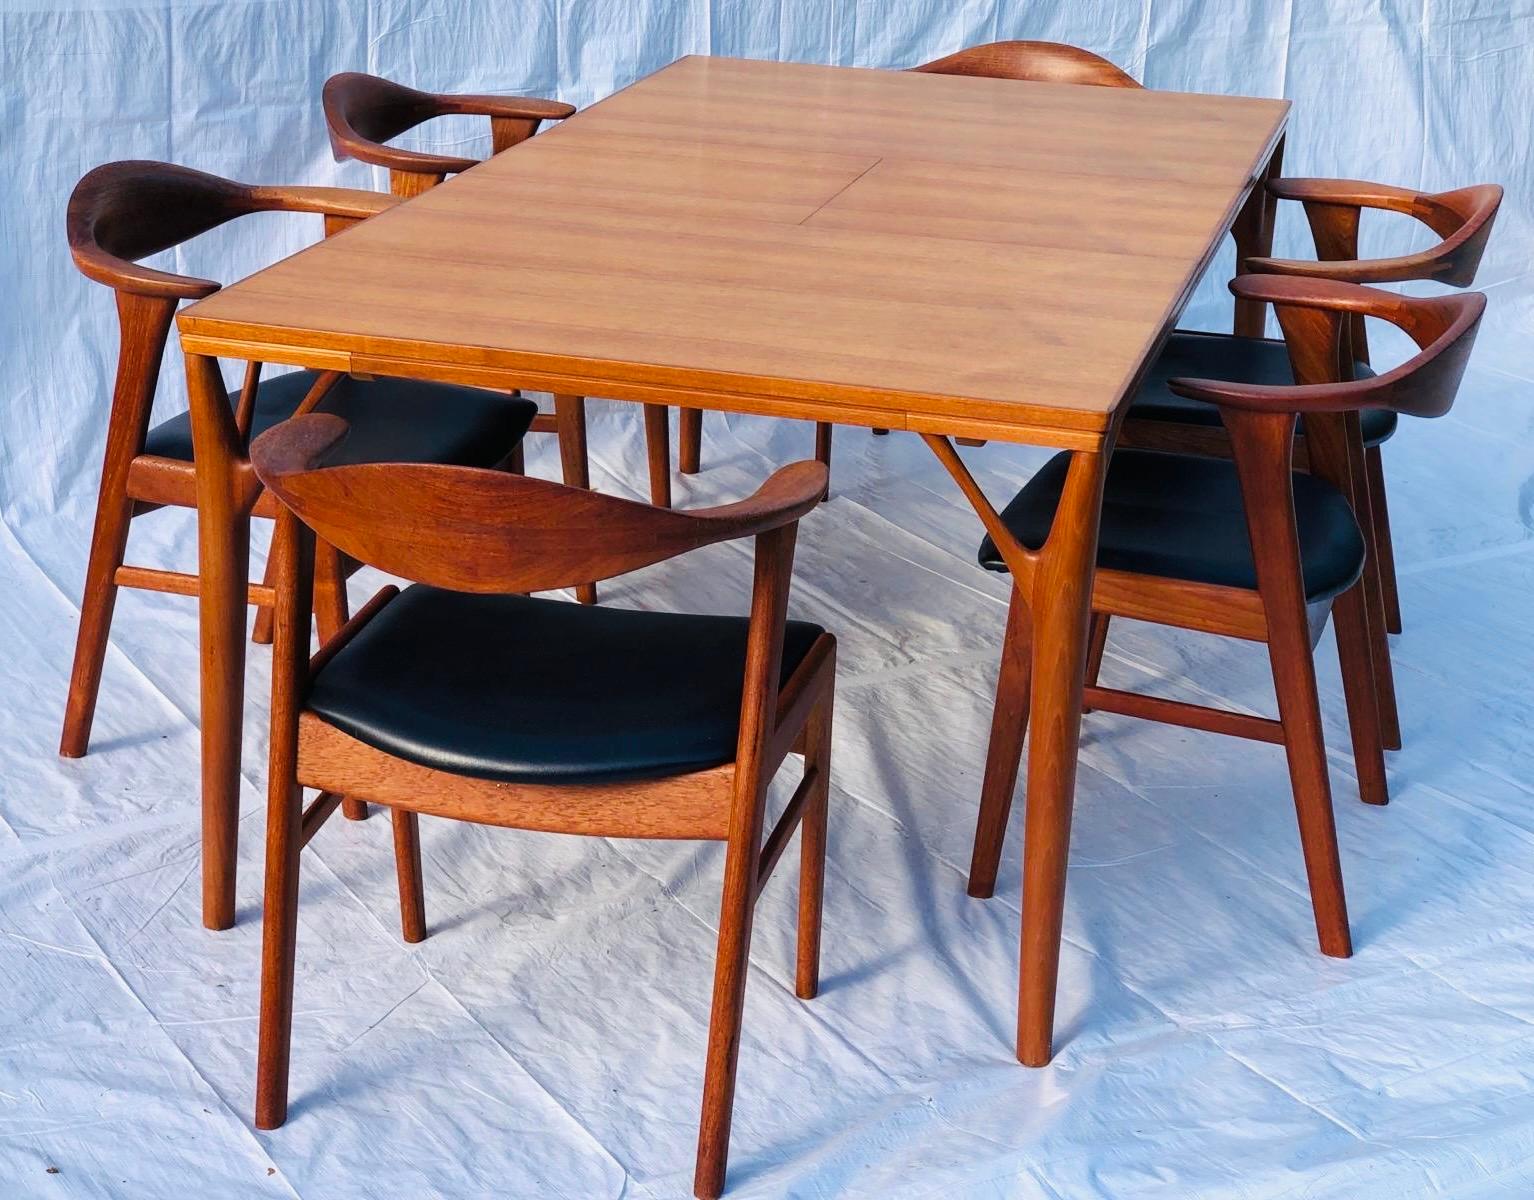 1960s Danish Teak Willy Sigh 'Tree Leg' Dining Table Model 180 by H Sigh & Søn  For Sale 7